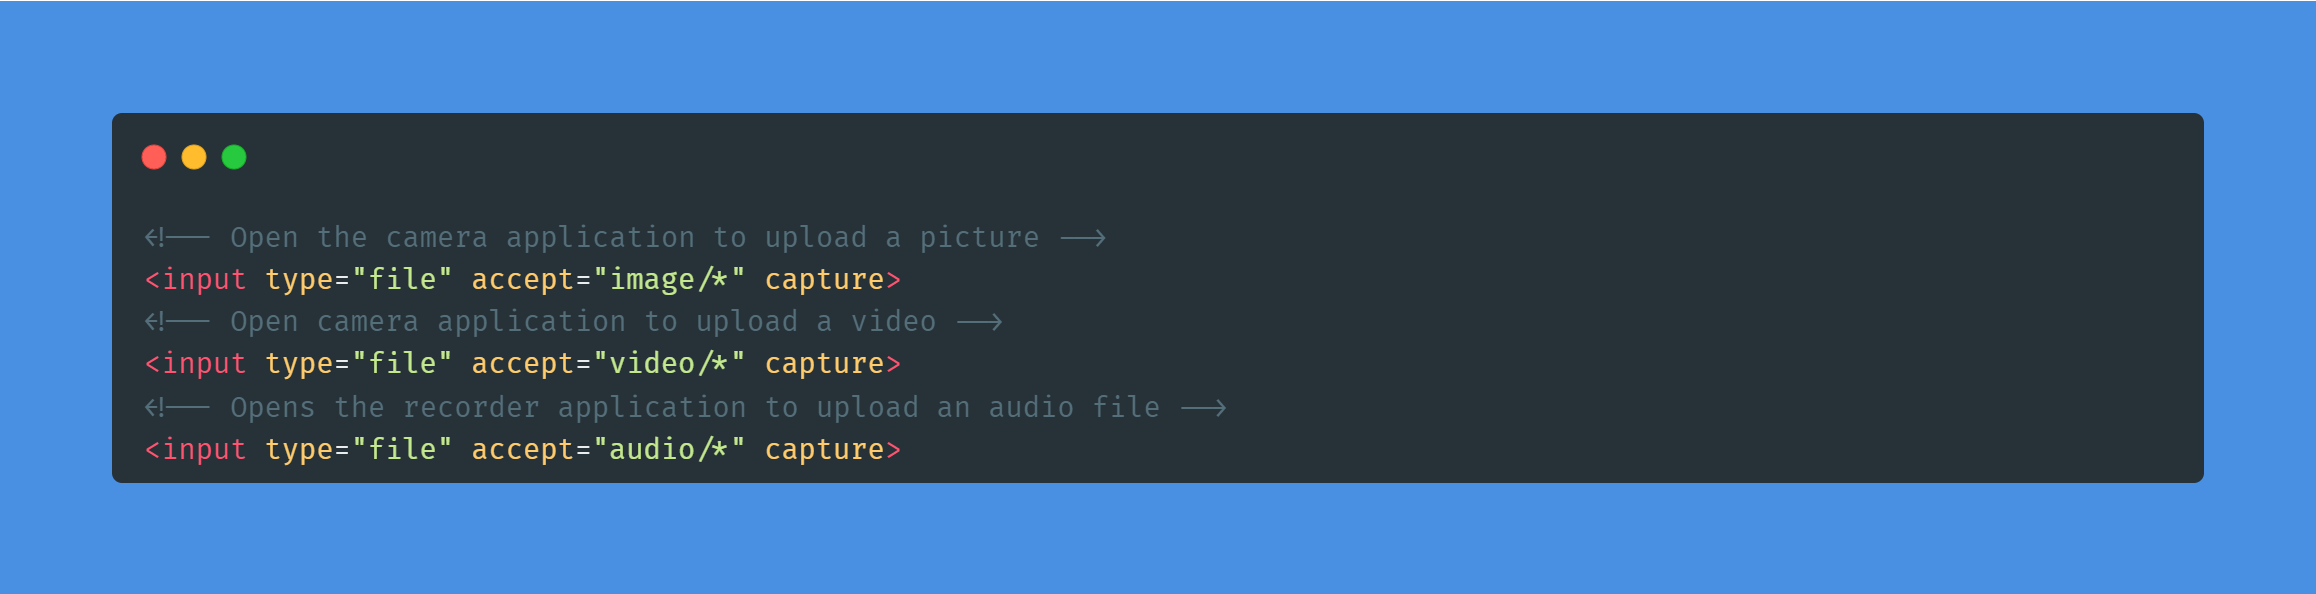 Code snippet displaying the use of the capture attribute to record images, videos and audios